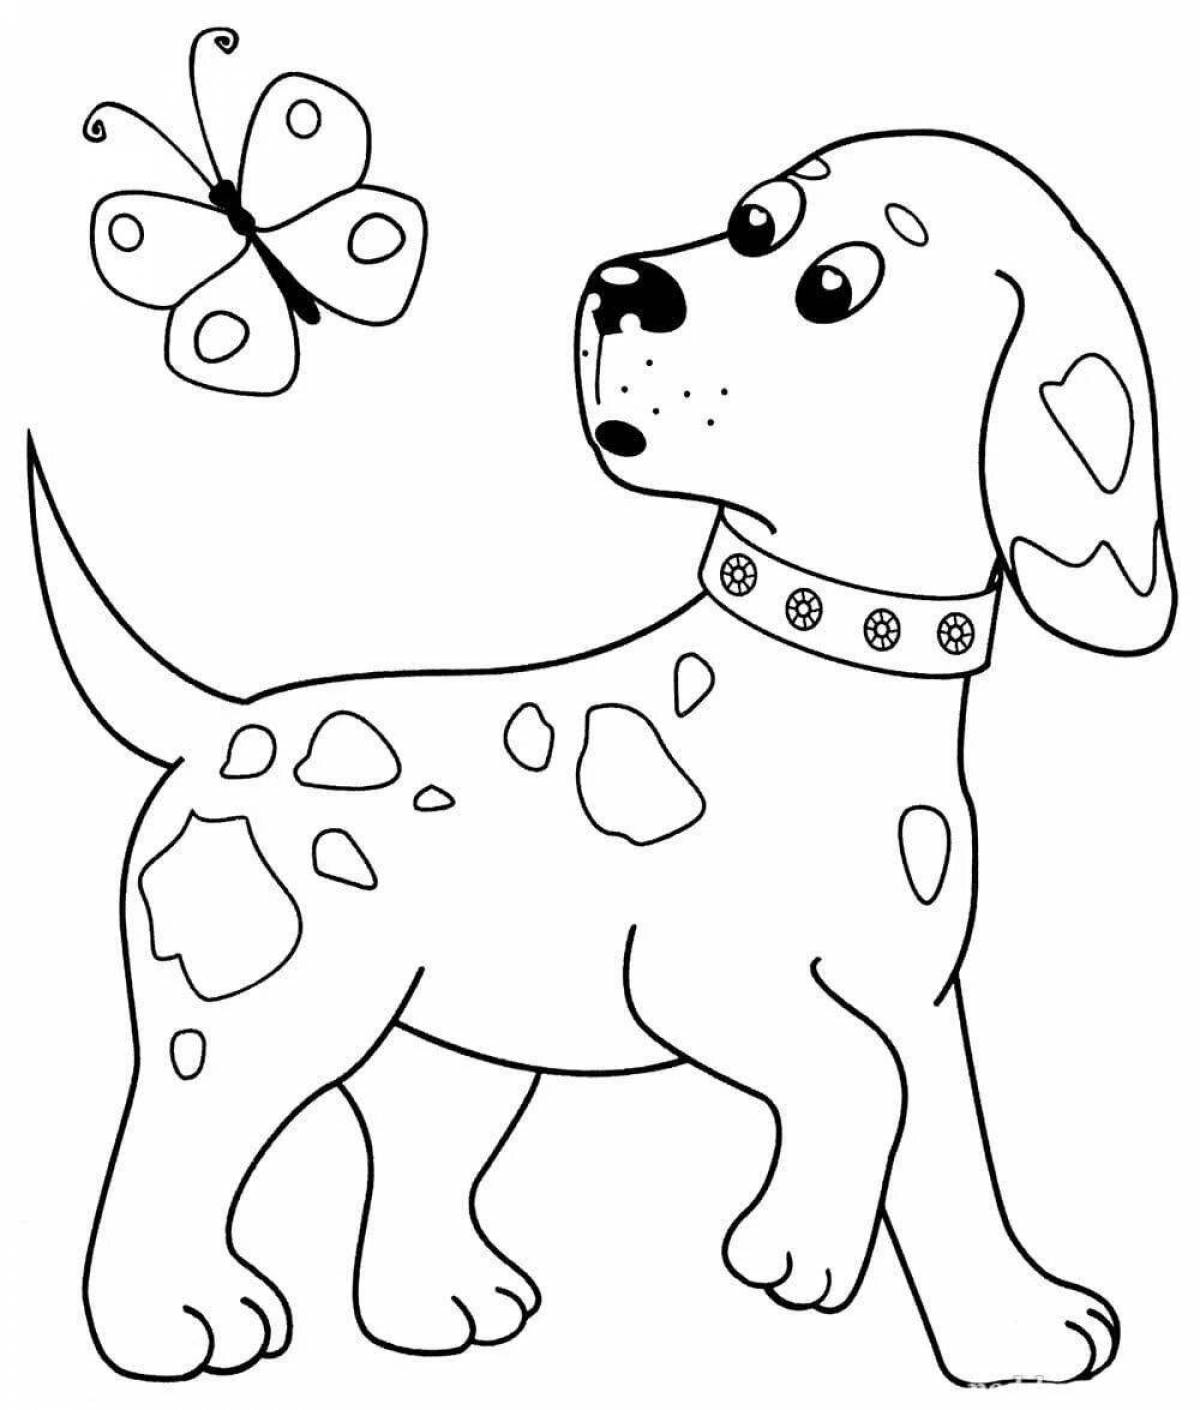 Nice dog coloring for kids